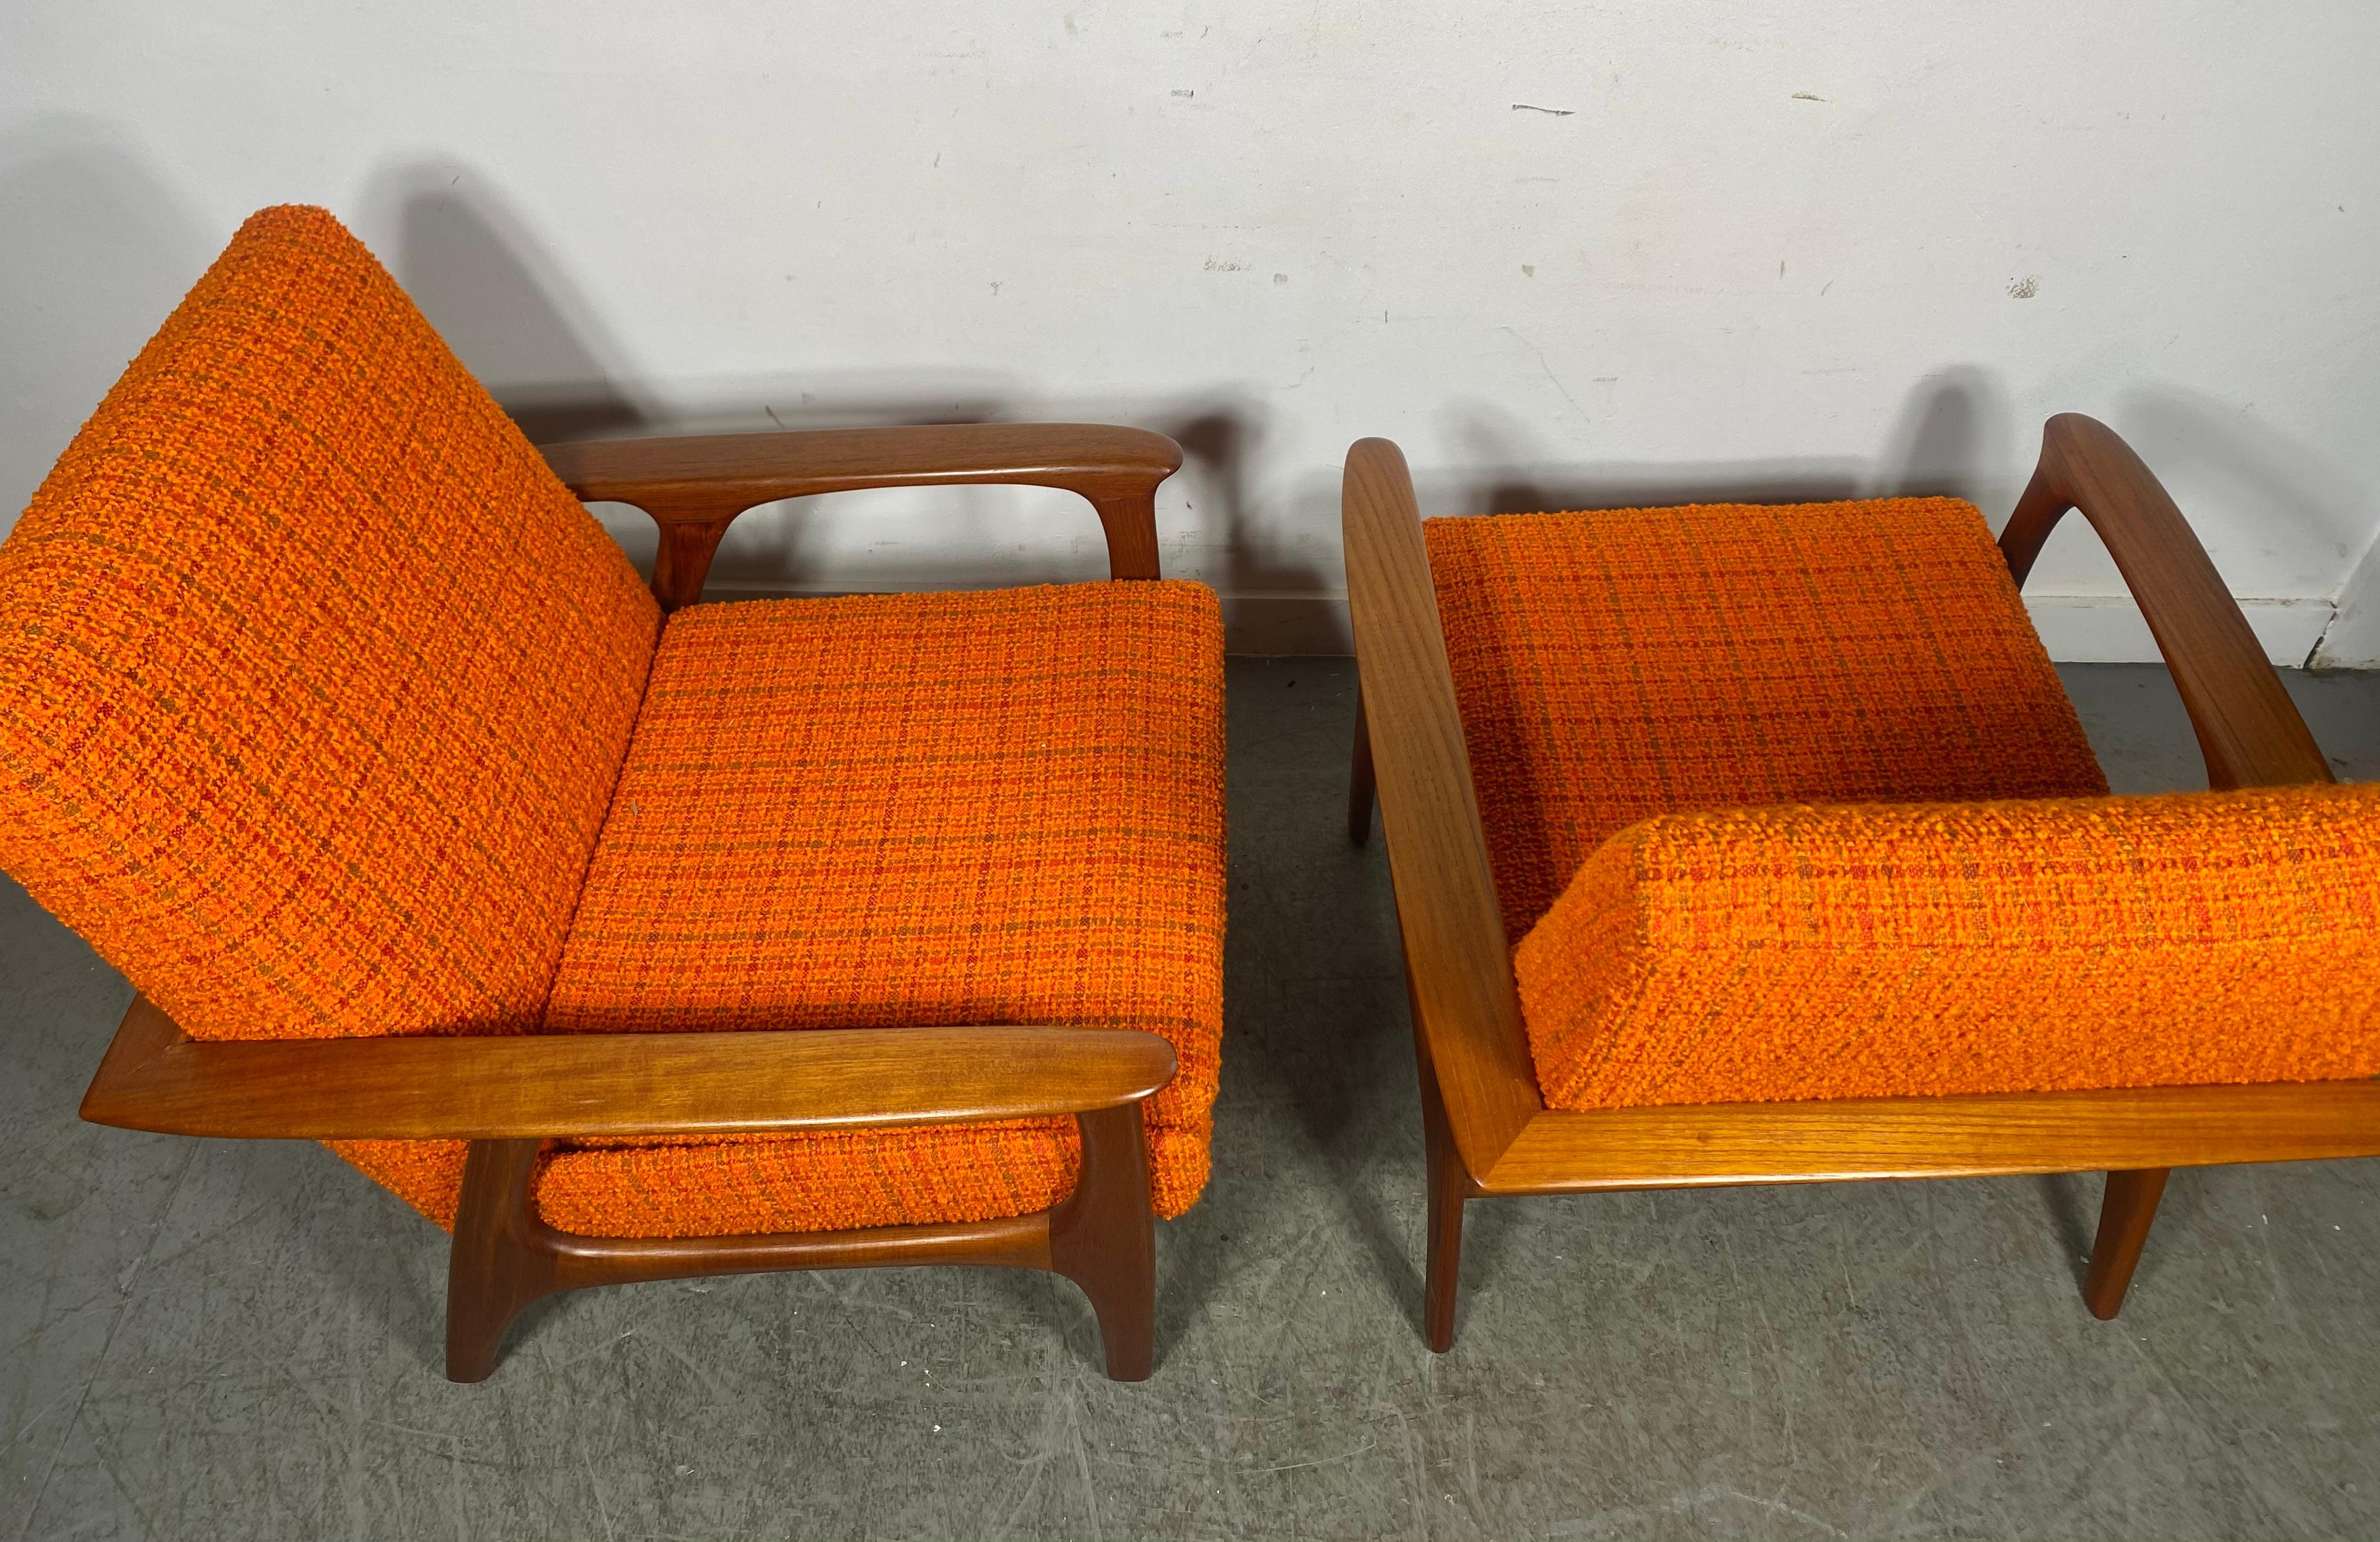 Classic Scandinavian Modern Teak Lounge Chairs , manner Of Hans Wegner In Good Condition For Sale In Buffalo, NY